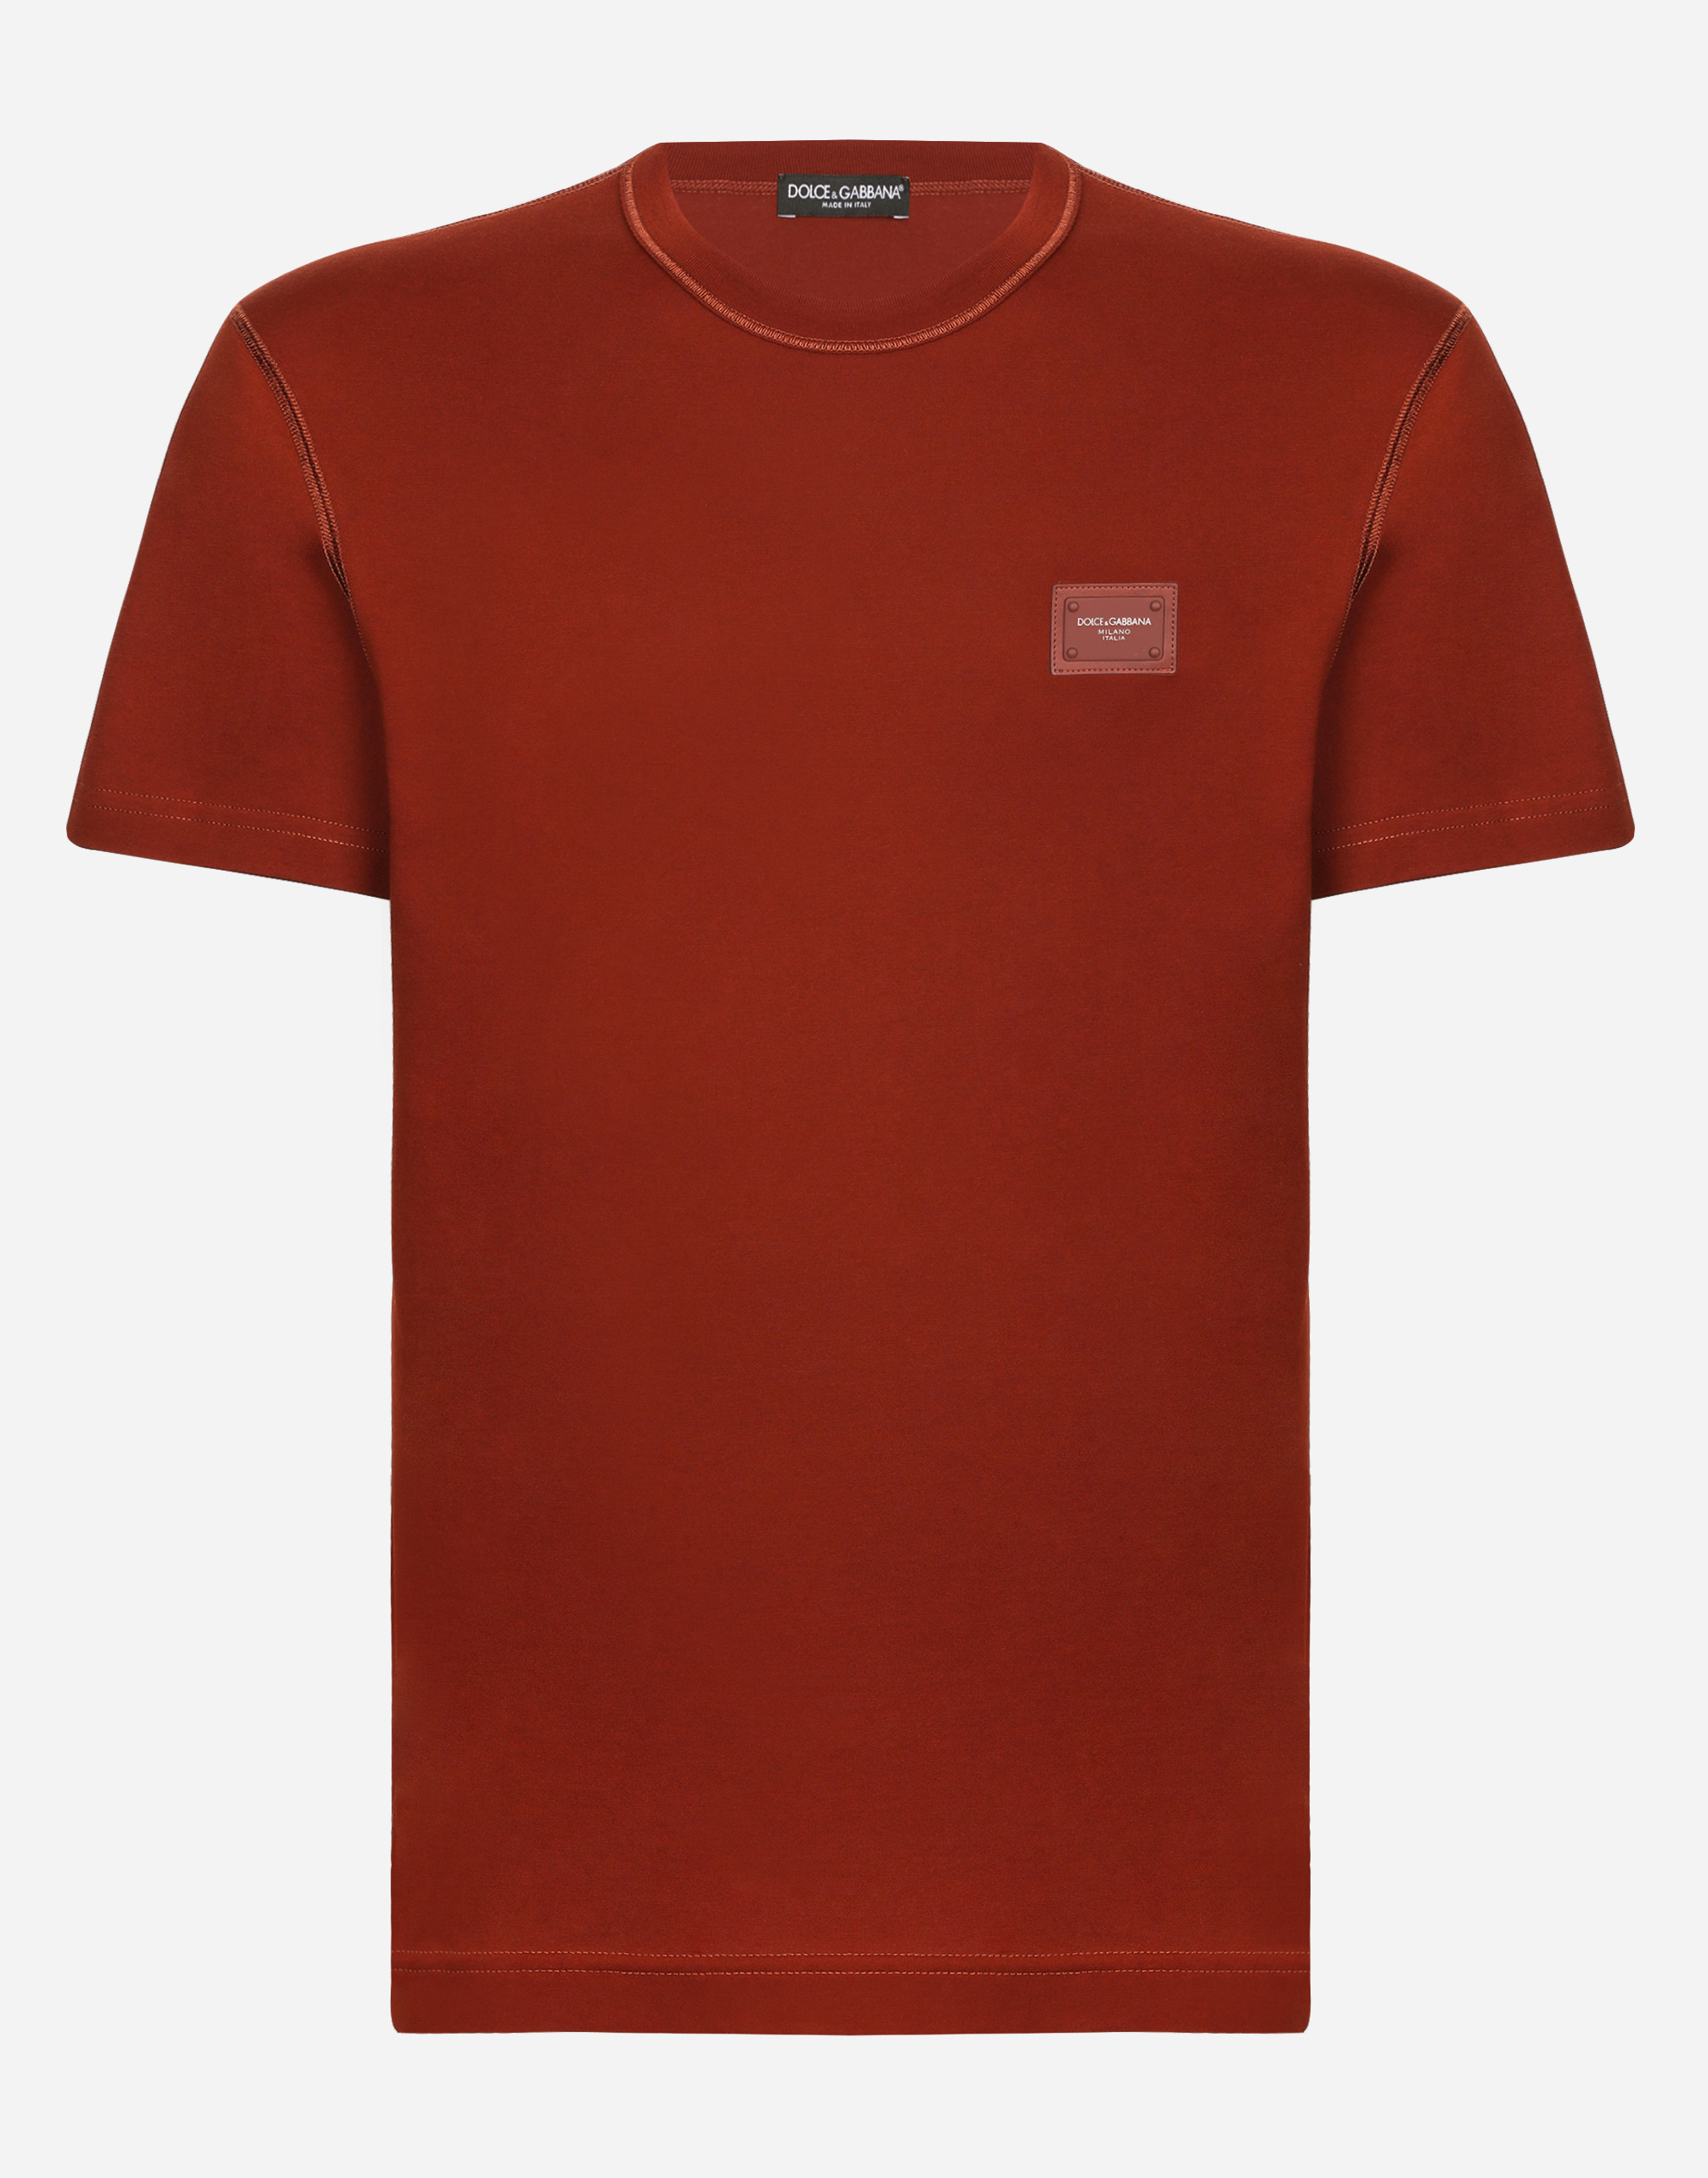 Cotton T-shirt with branded plate in Copper